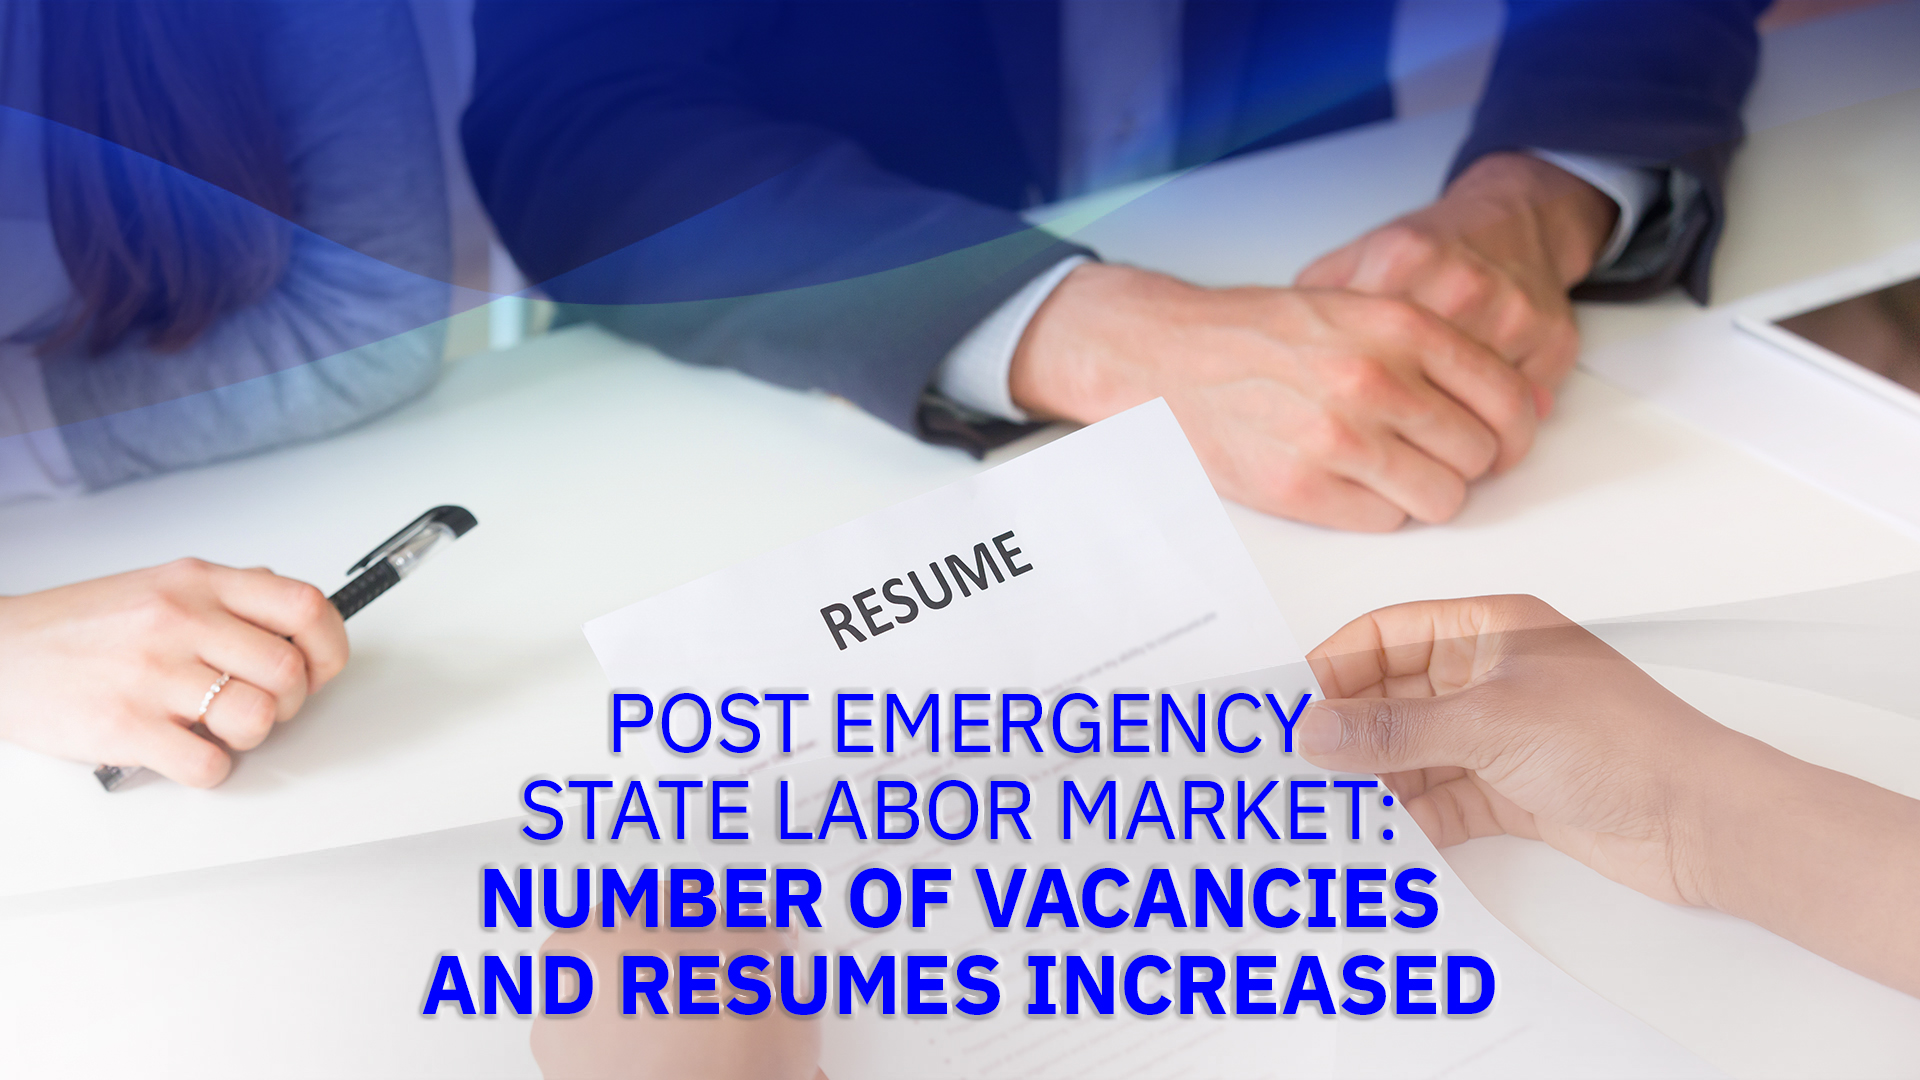 Labor market after emergency state: Number of vacancies and resumes increased